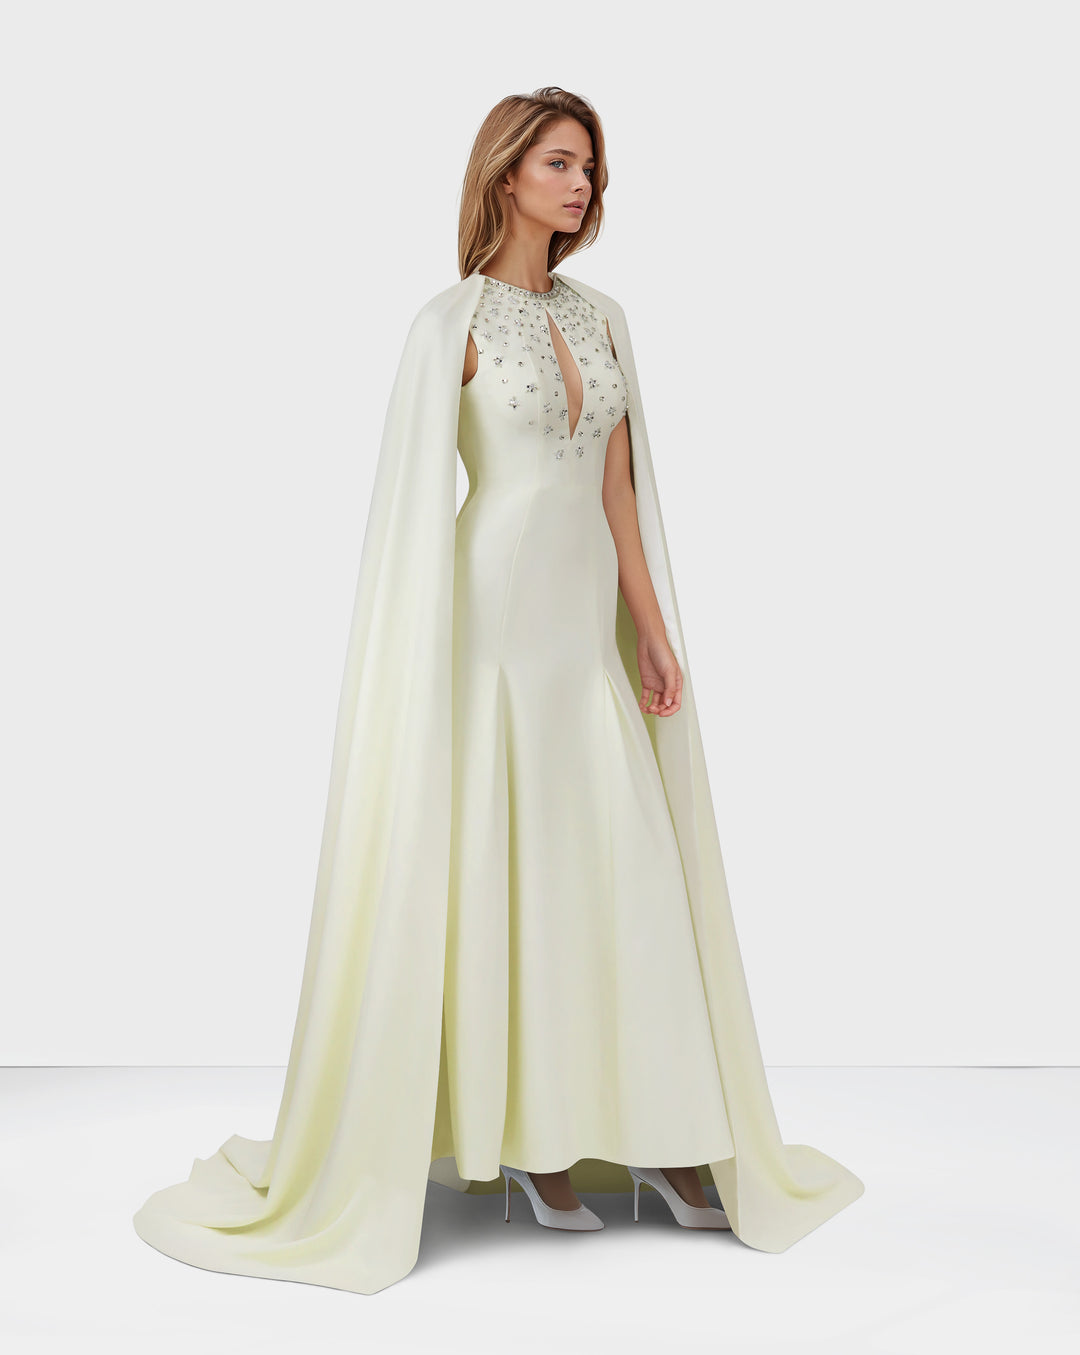 Beaded ivory dress with floor-length cape sleeves